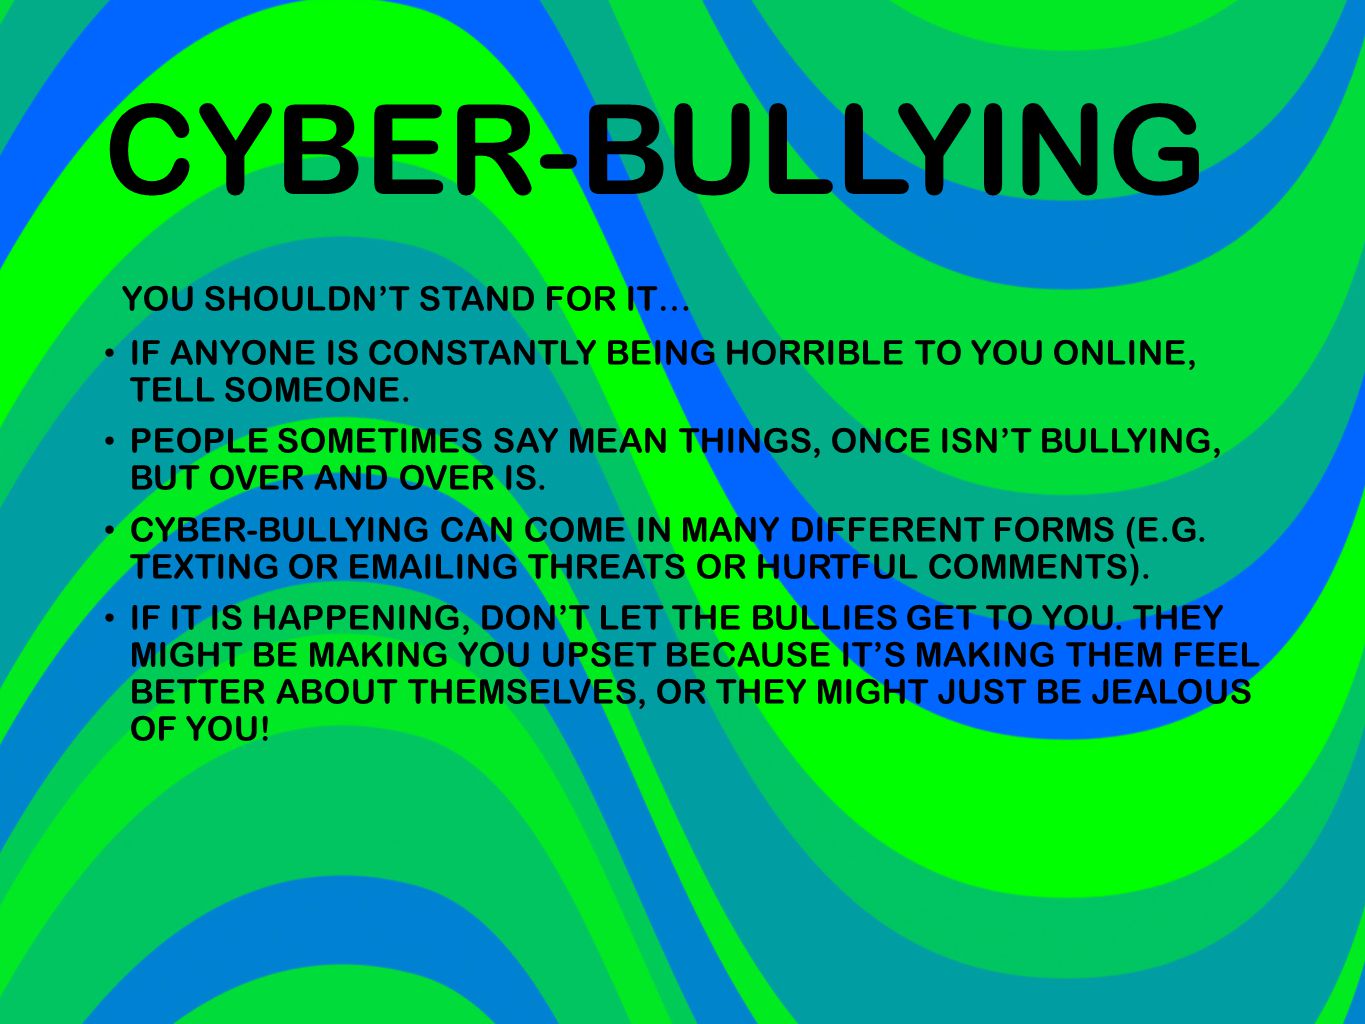 CYBER-BULLYING YOU SHOULDN’T STAND FOR IT…